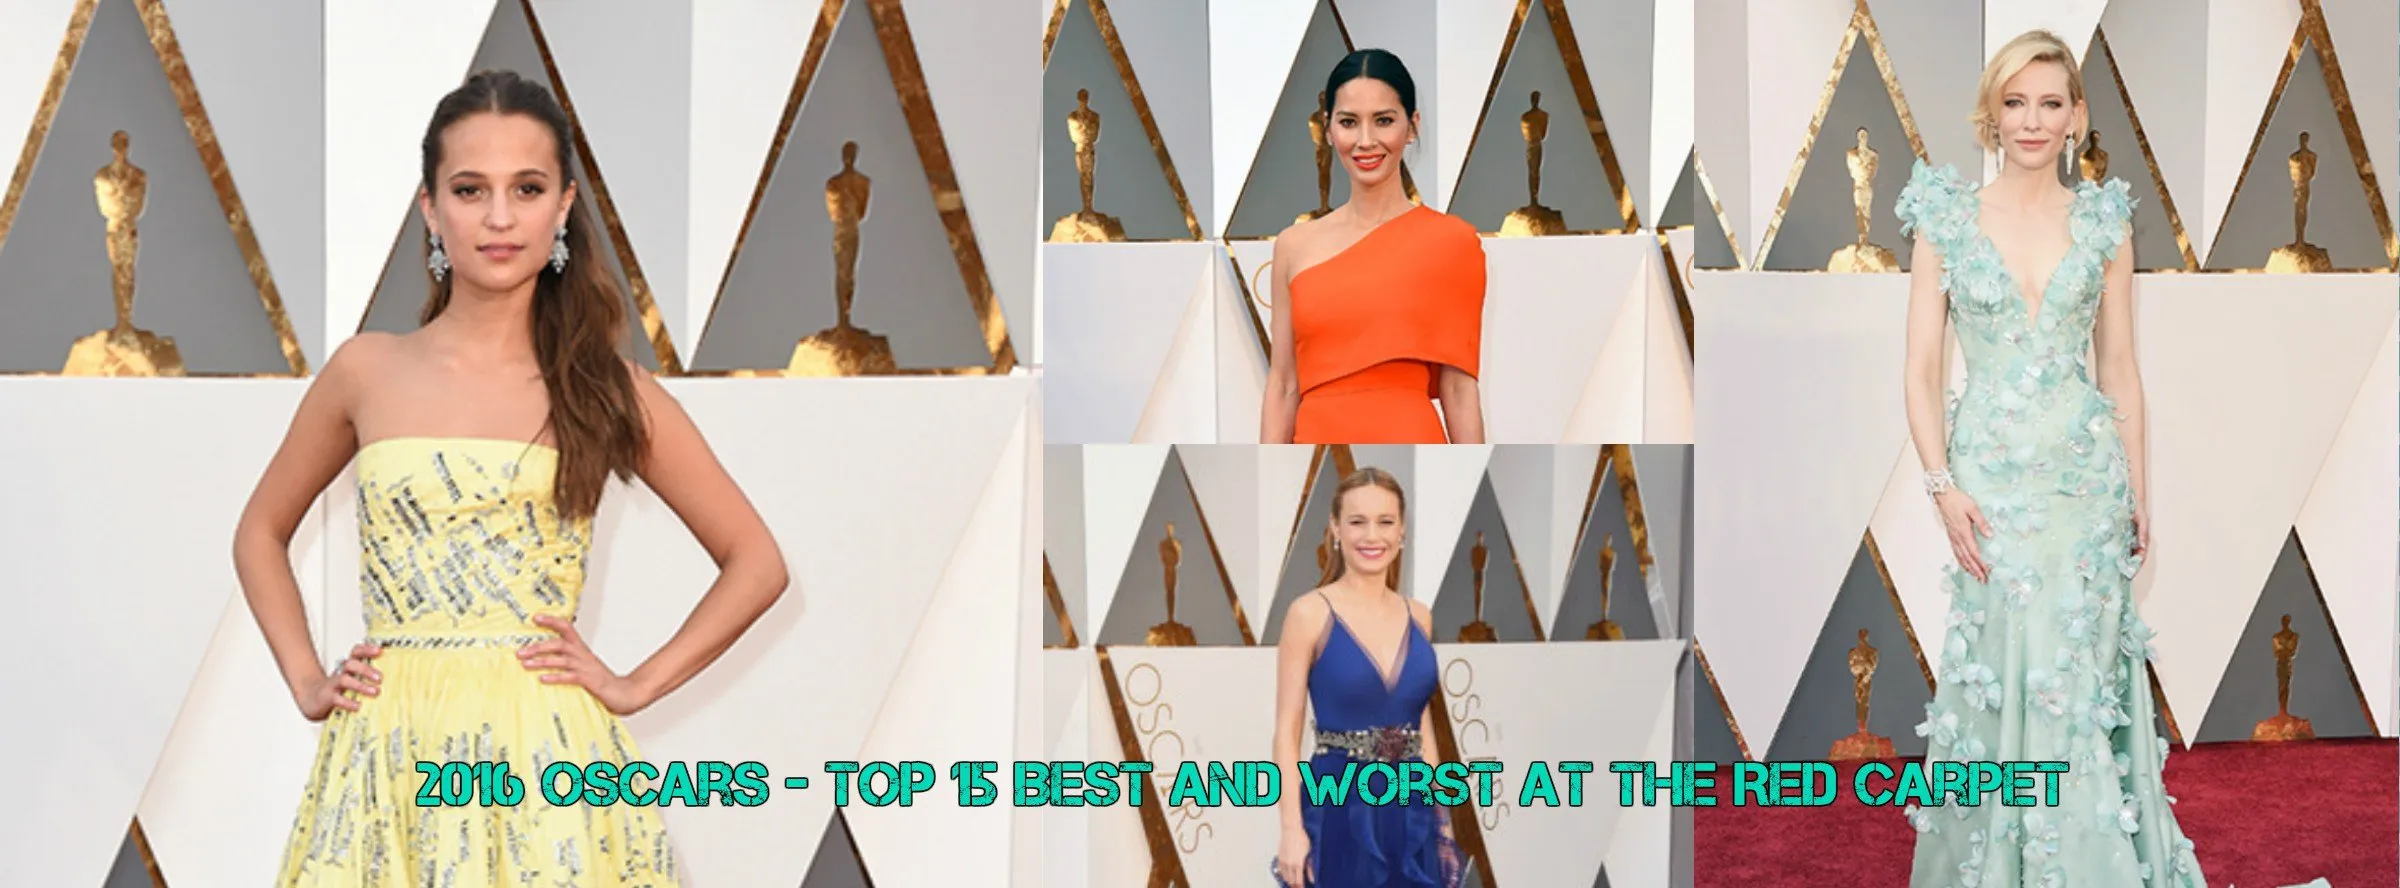 2016 Oscars – Top 15 Best and worst at The Red Carpet